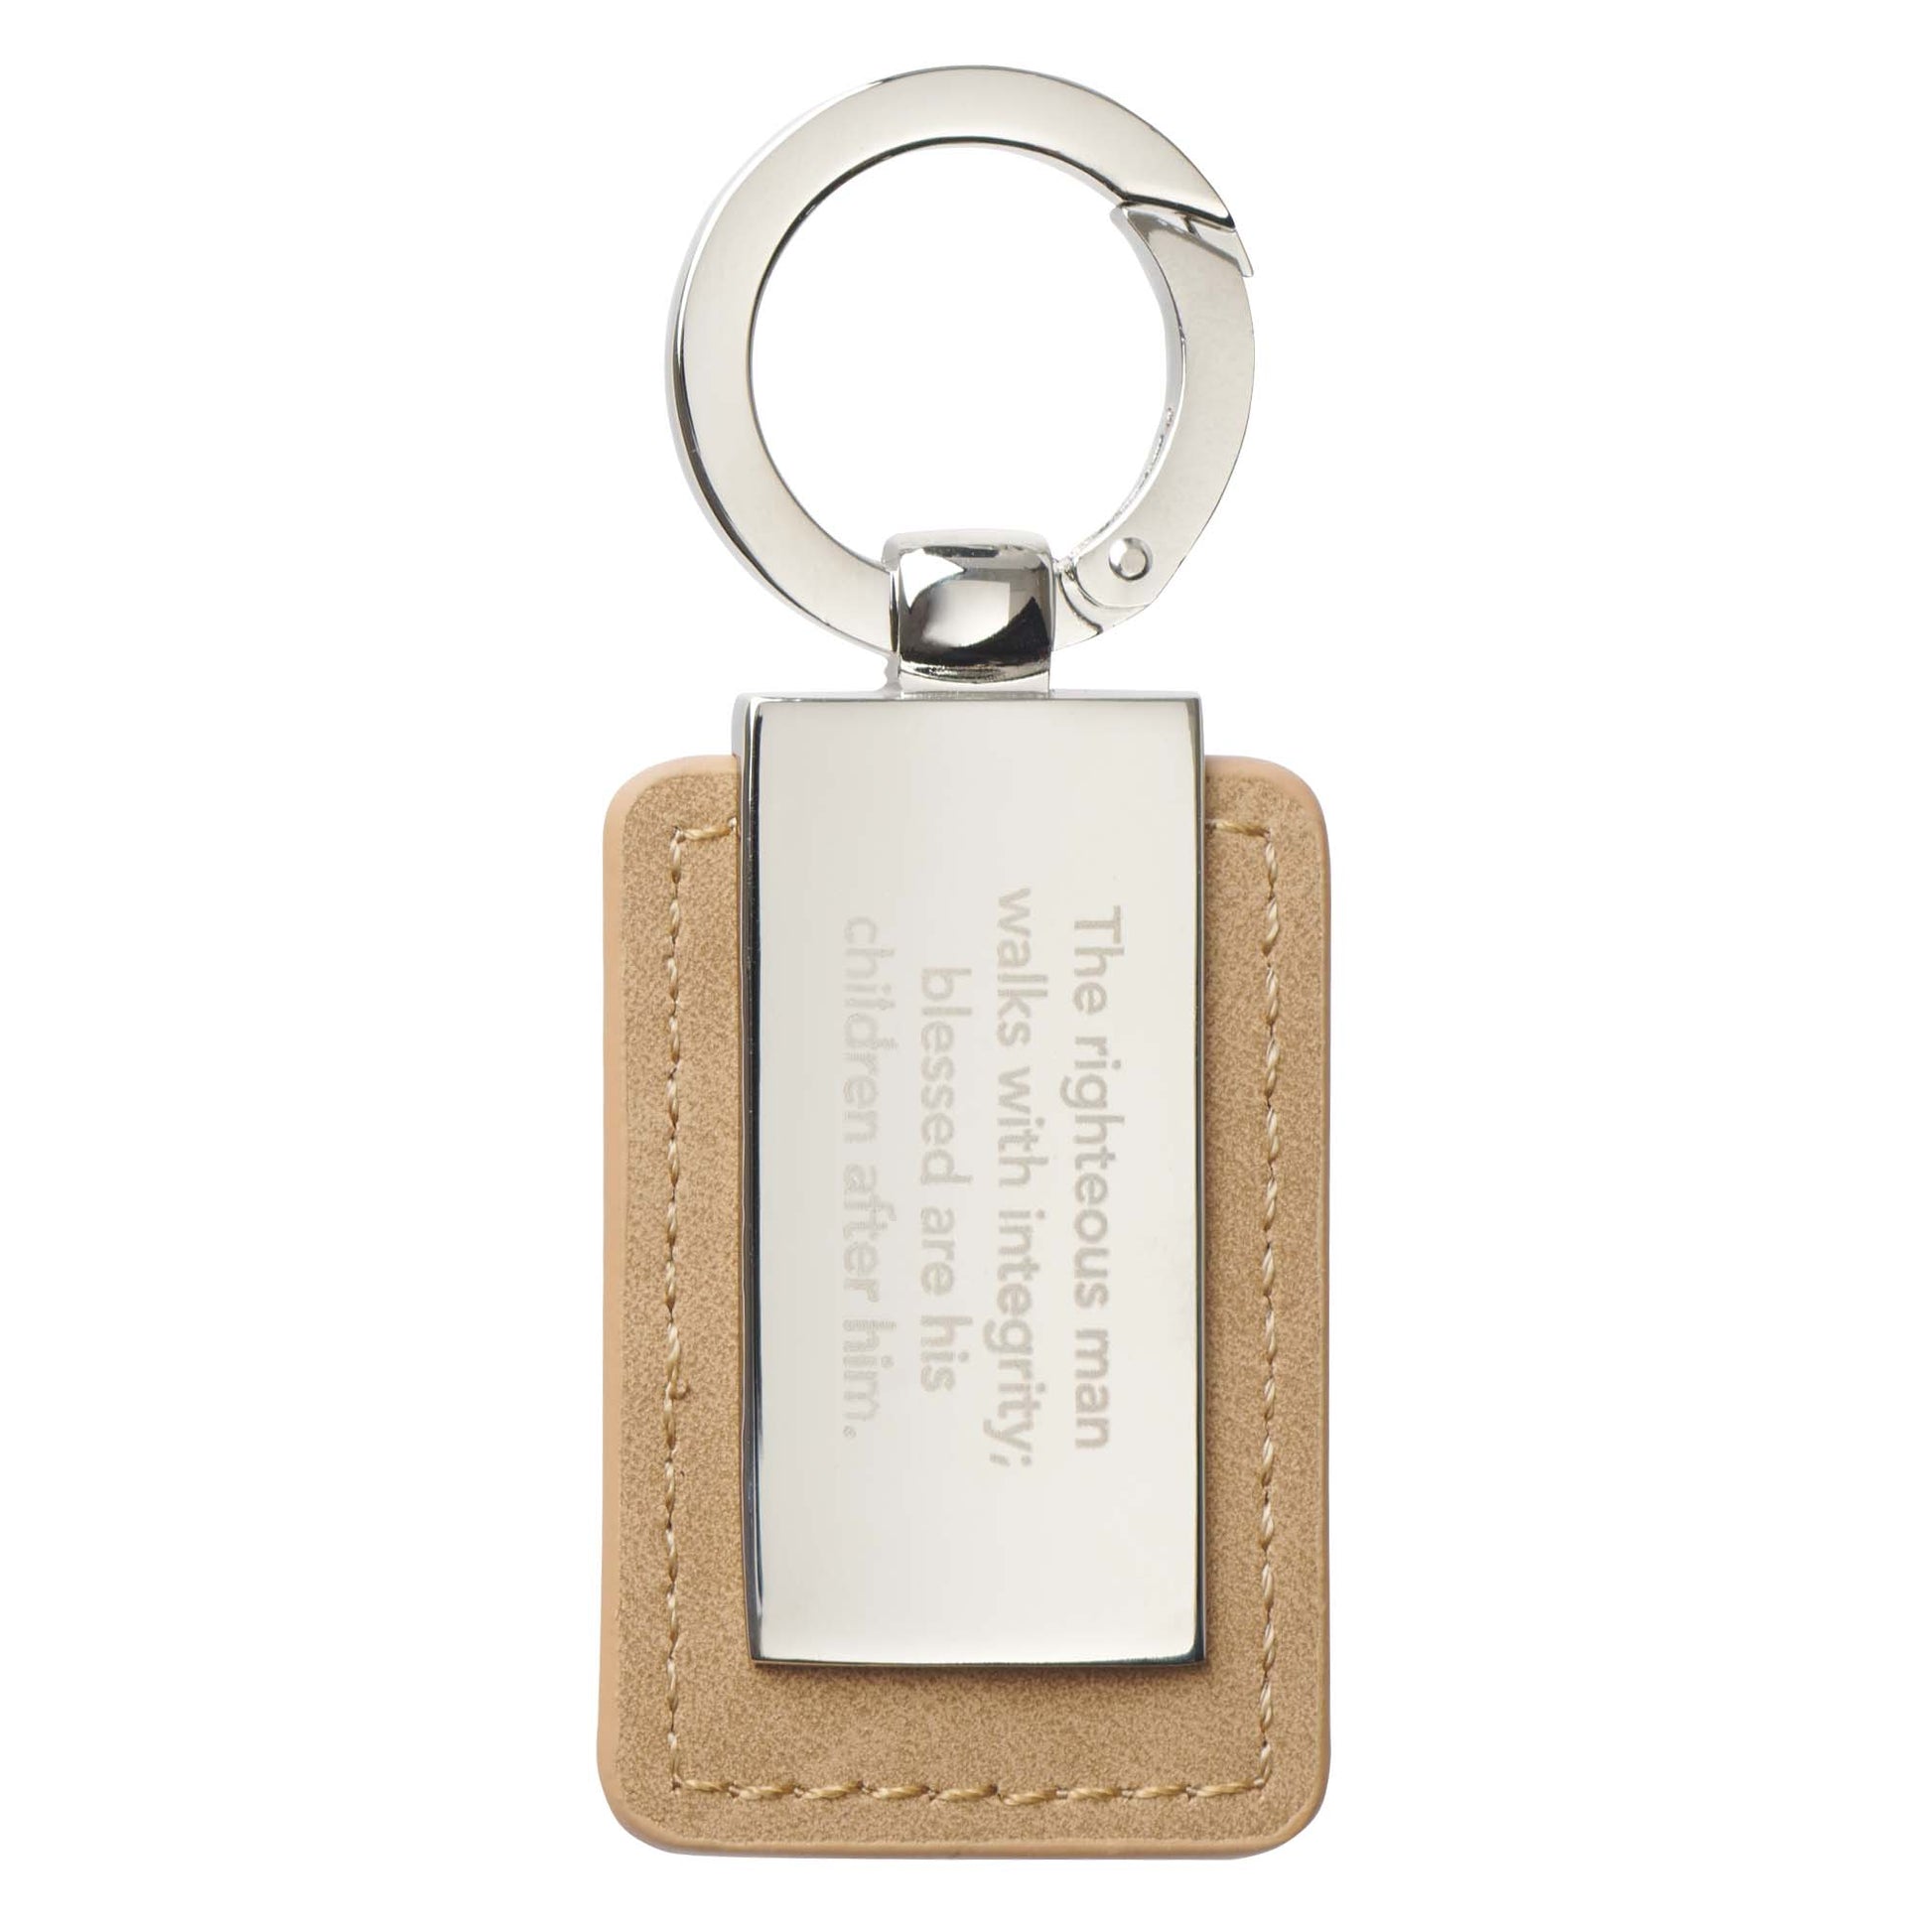 Righteous Man Silver and Tan Key Ring in Gift Tin - Proverbs 20:7 - The Christian Gift Company